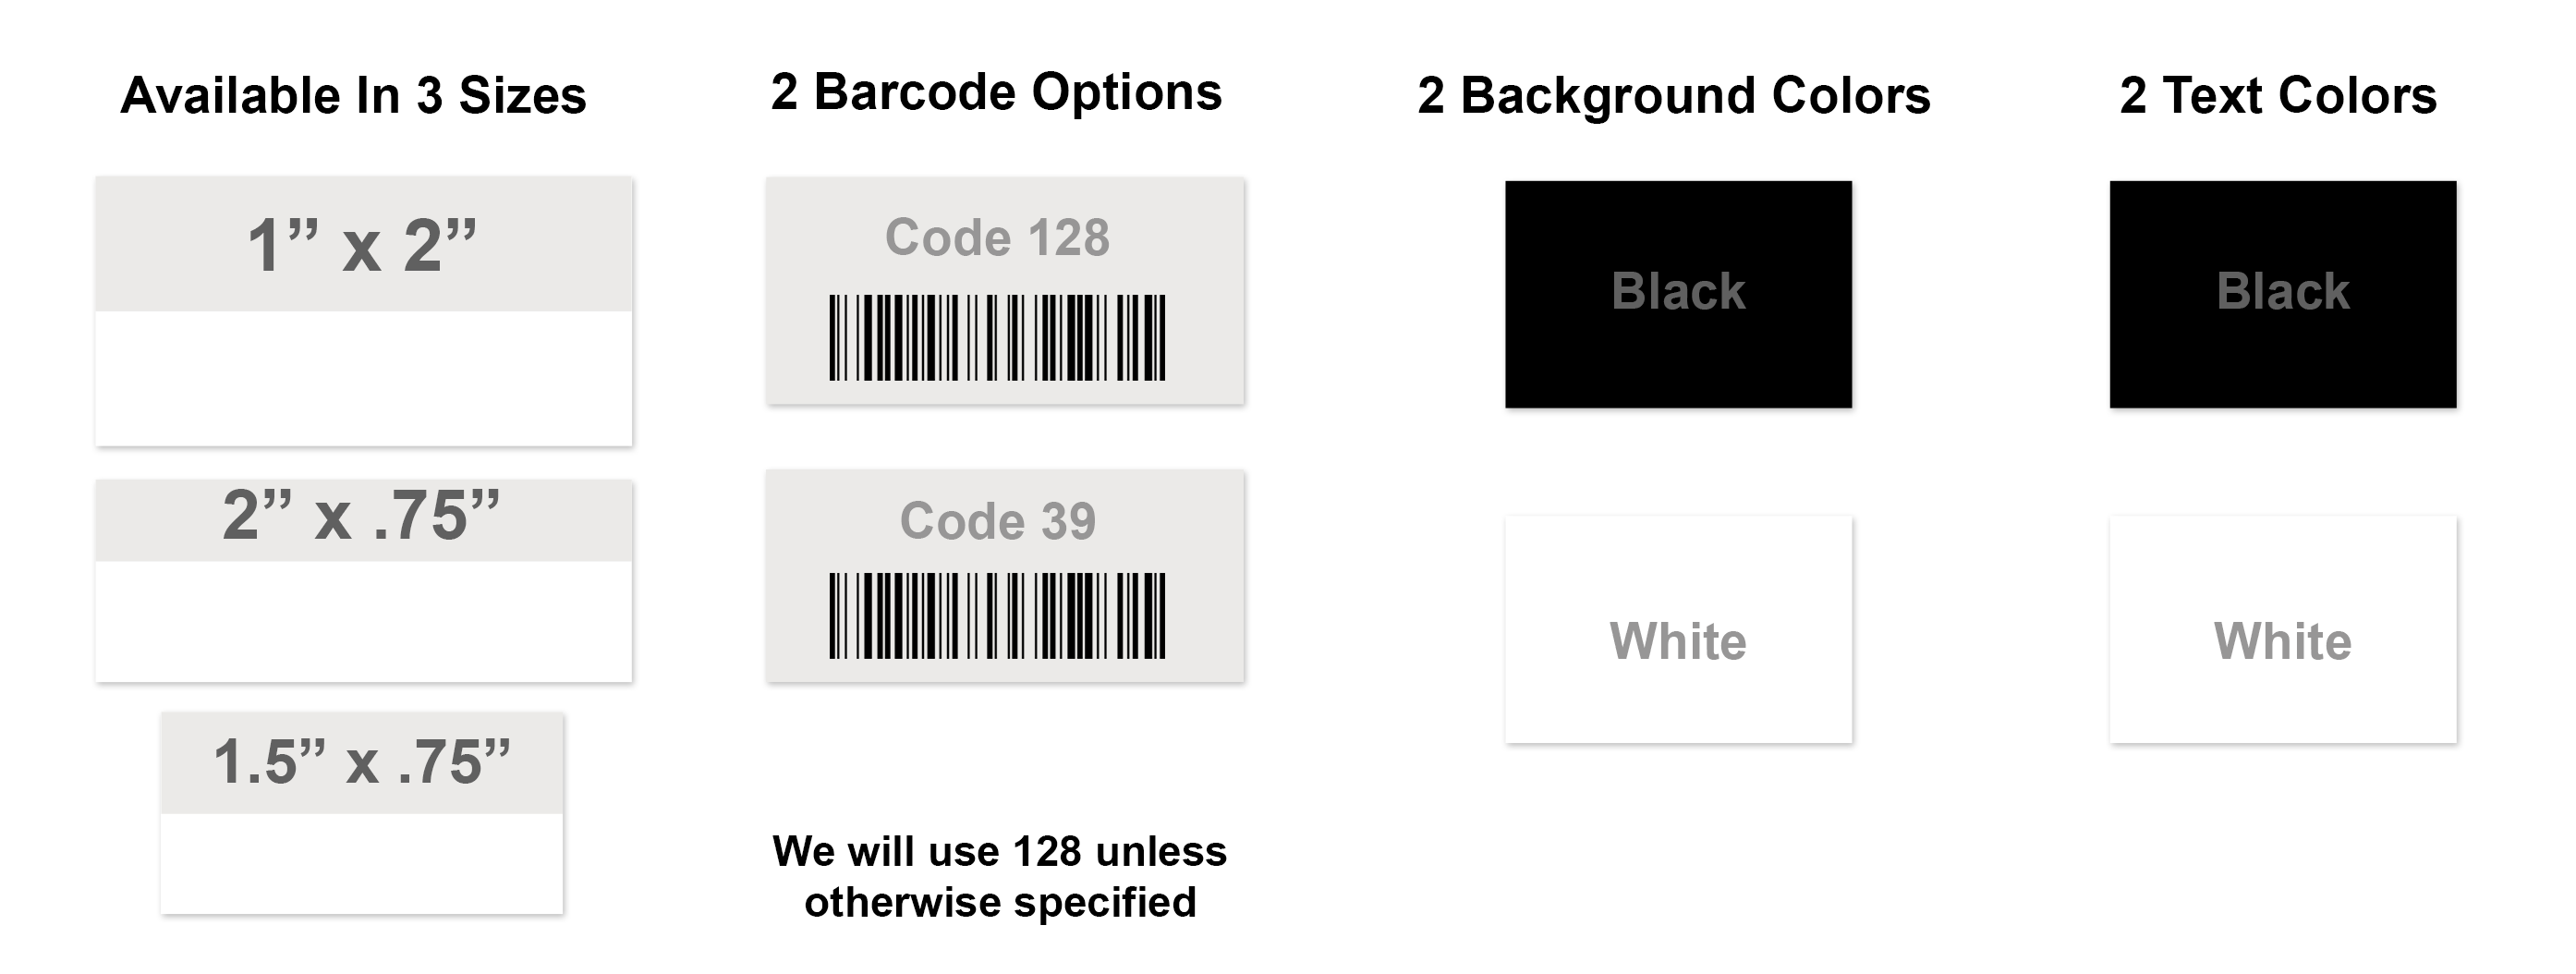 Economy Asset Tag with Barcode Options